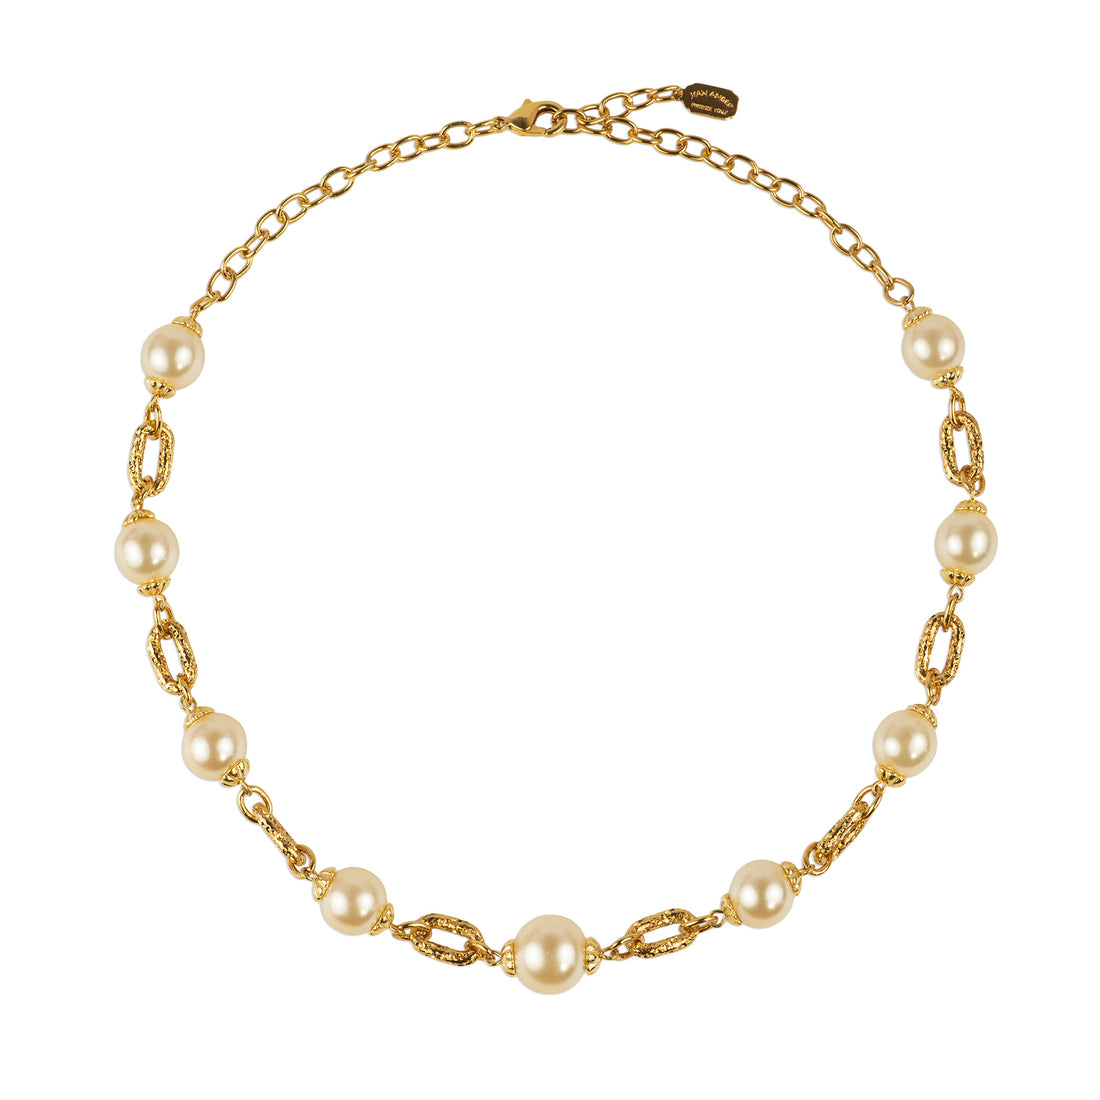 Chain and pearl choker necklace